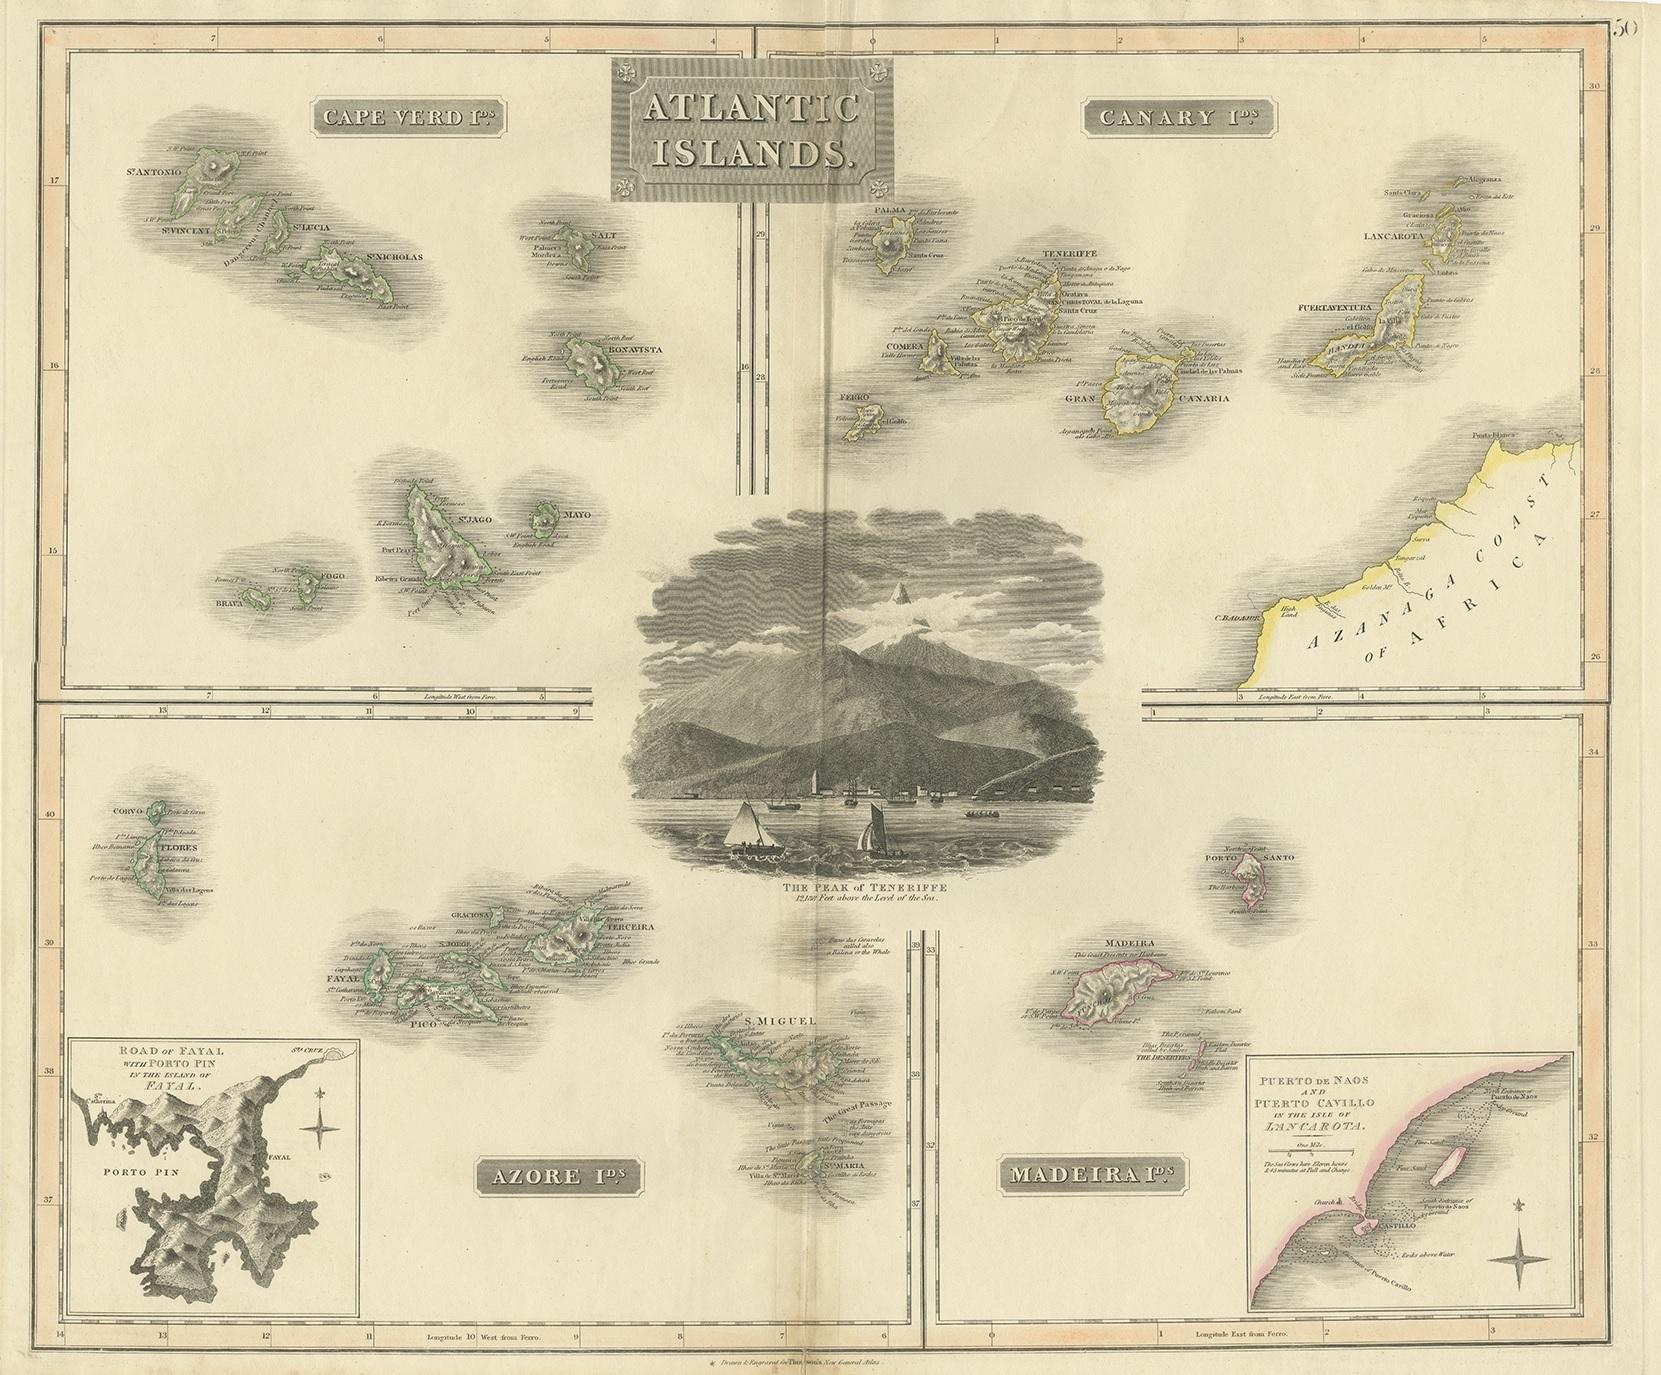 Antique map titled 'Atlantic Islands'. Large map of the Atlantic Islands include the Cape Verde islands, Canary islands, Azore islands and Madeira islands. Also included a view of the peak of Tenerife. Originates from 'A New General Atlas,